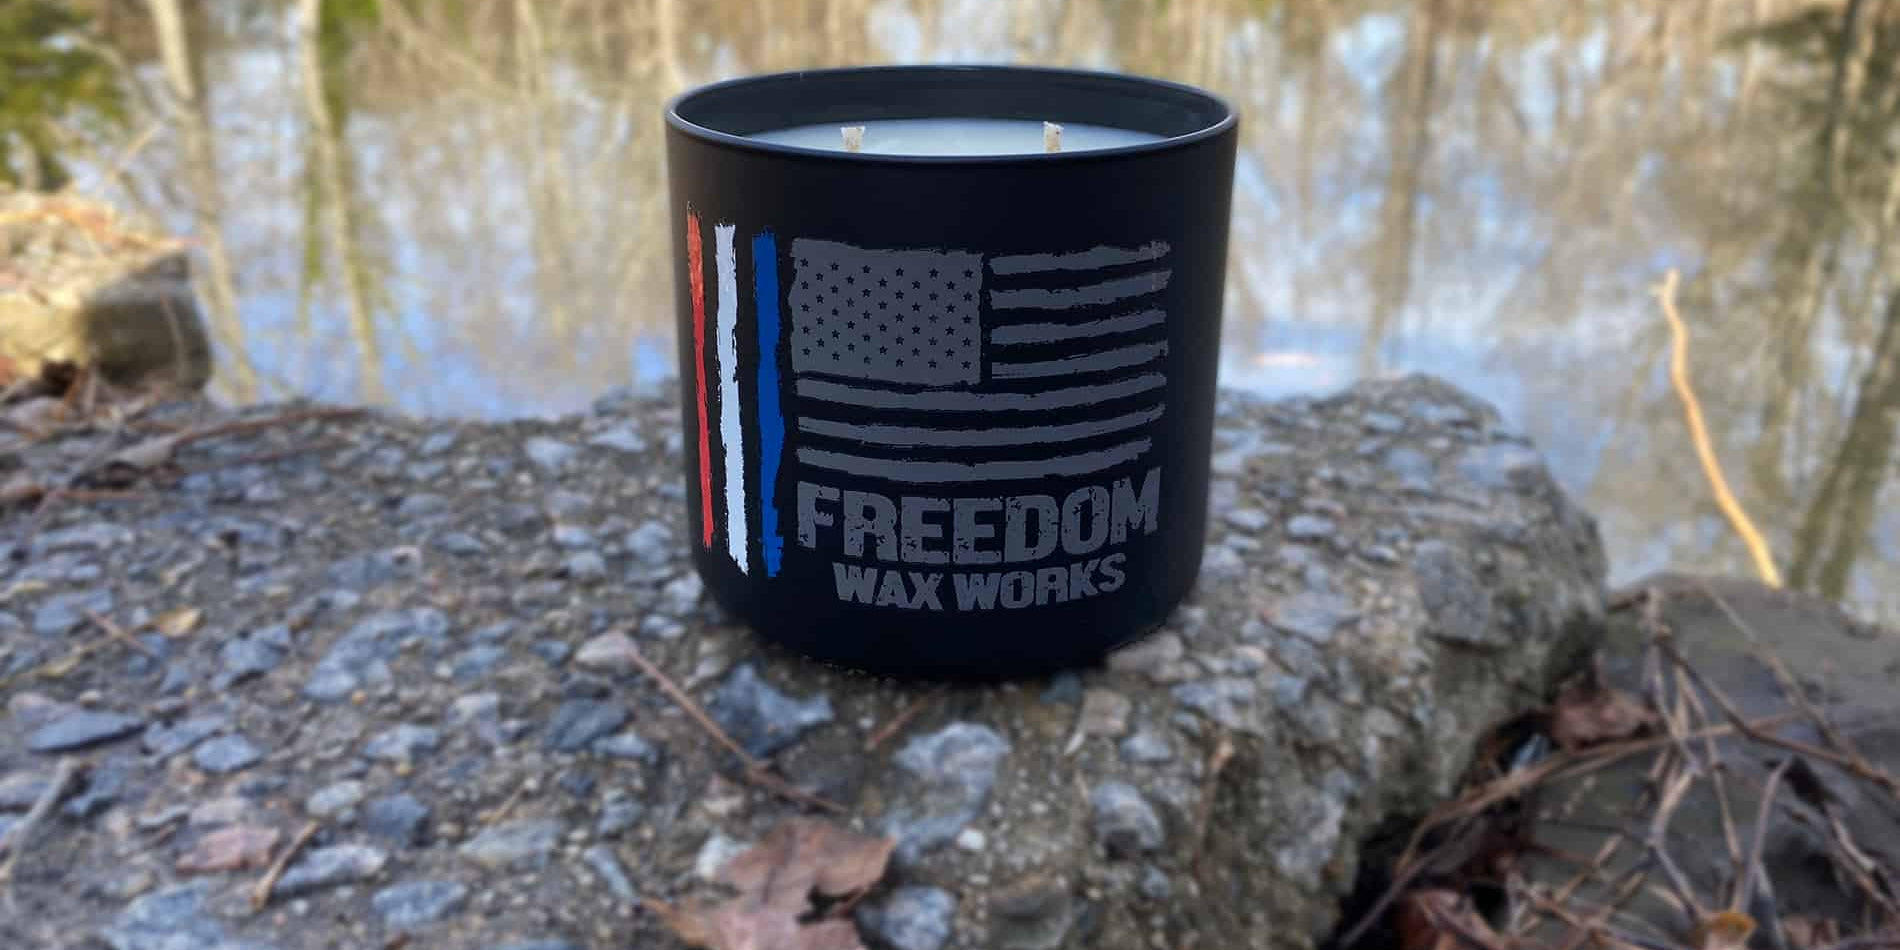 Freedom wax works candle